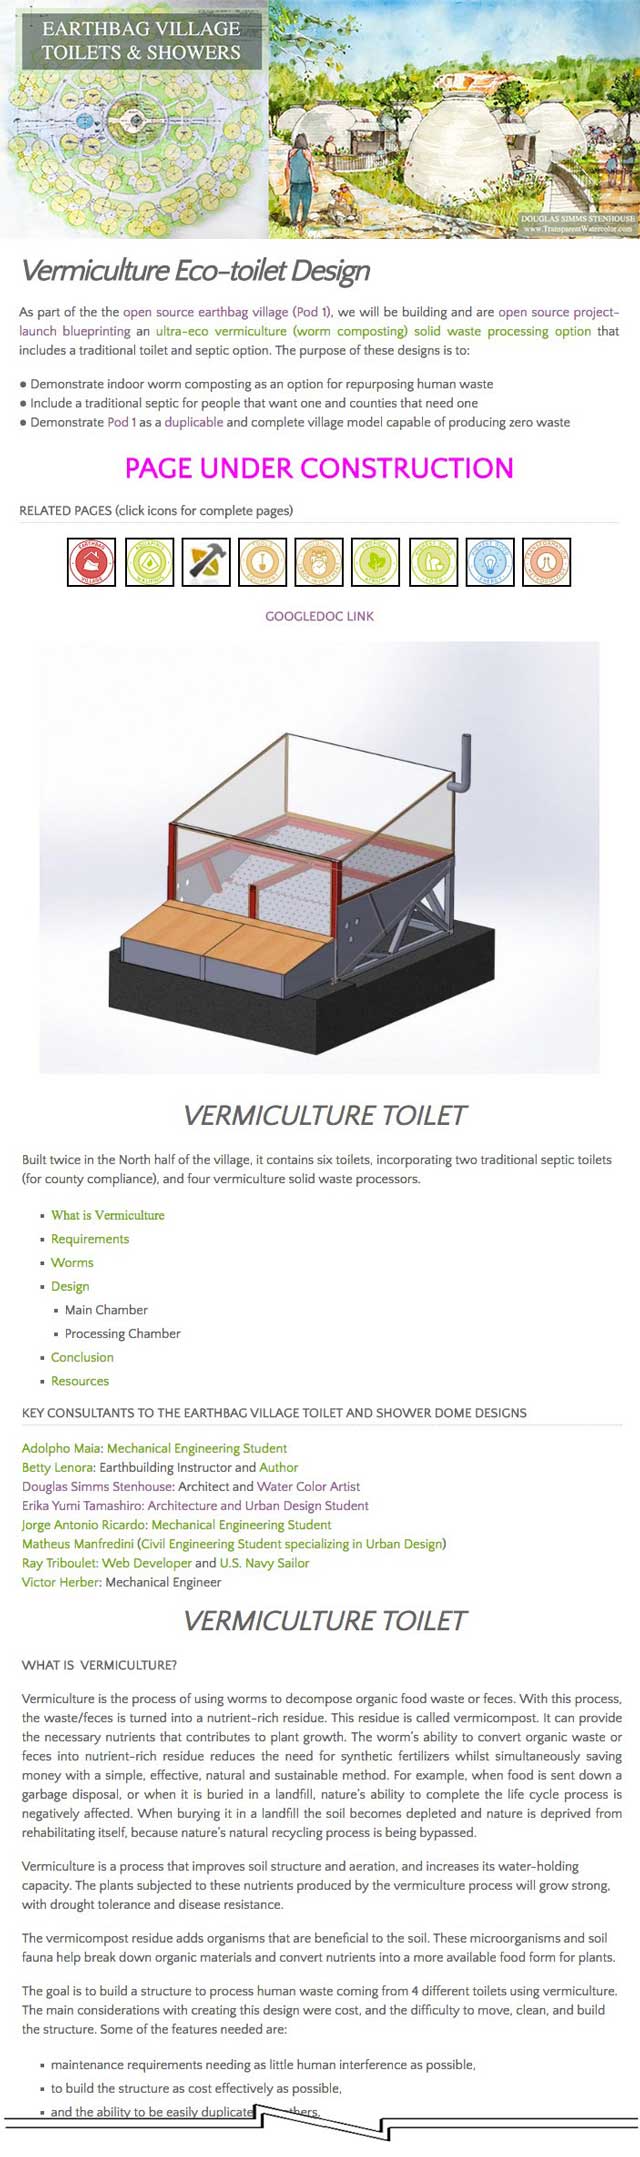 Ray Triboulet (Web Developer and Active Duty U.S. Sailor) also began moving the Earthbag Village (Pod 1) communal Vermiculture Eco-Toilet design details to their own page. You can see this work here.